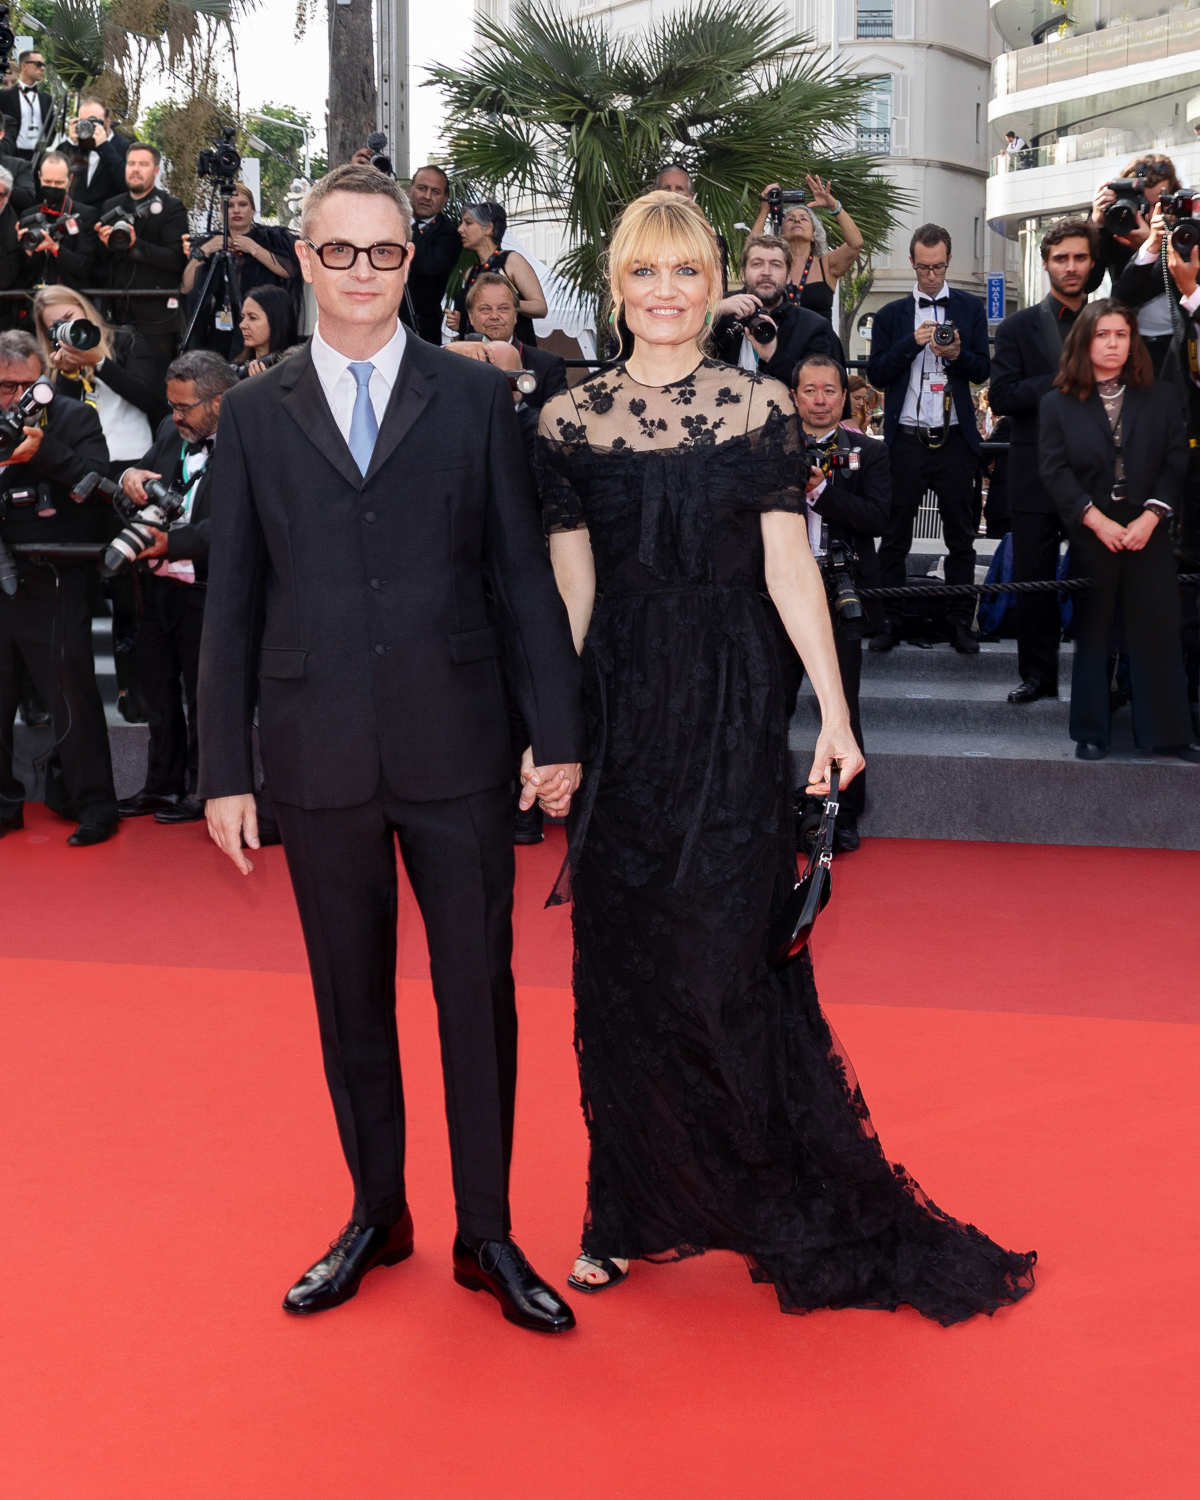 PRADA At The 75th Cannes Film Festival On May 28, 2022